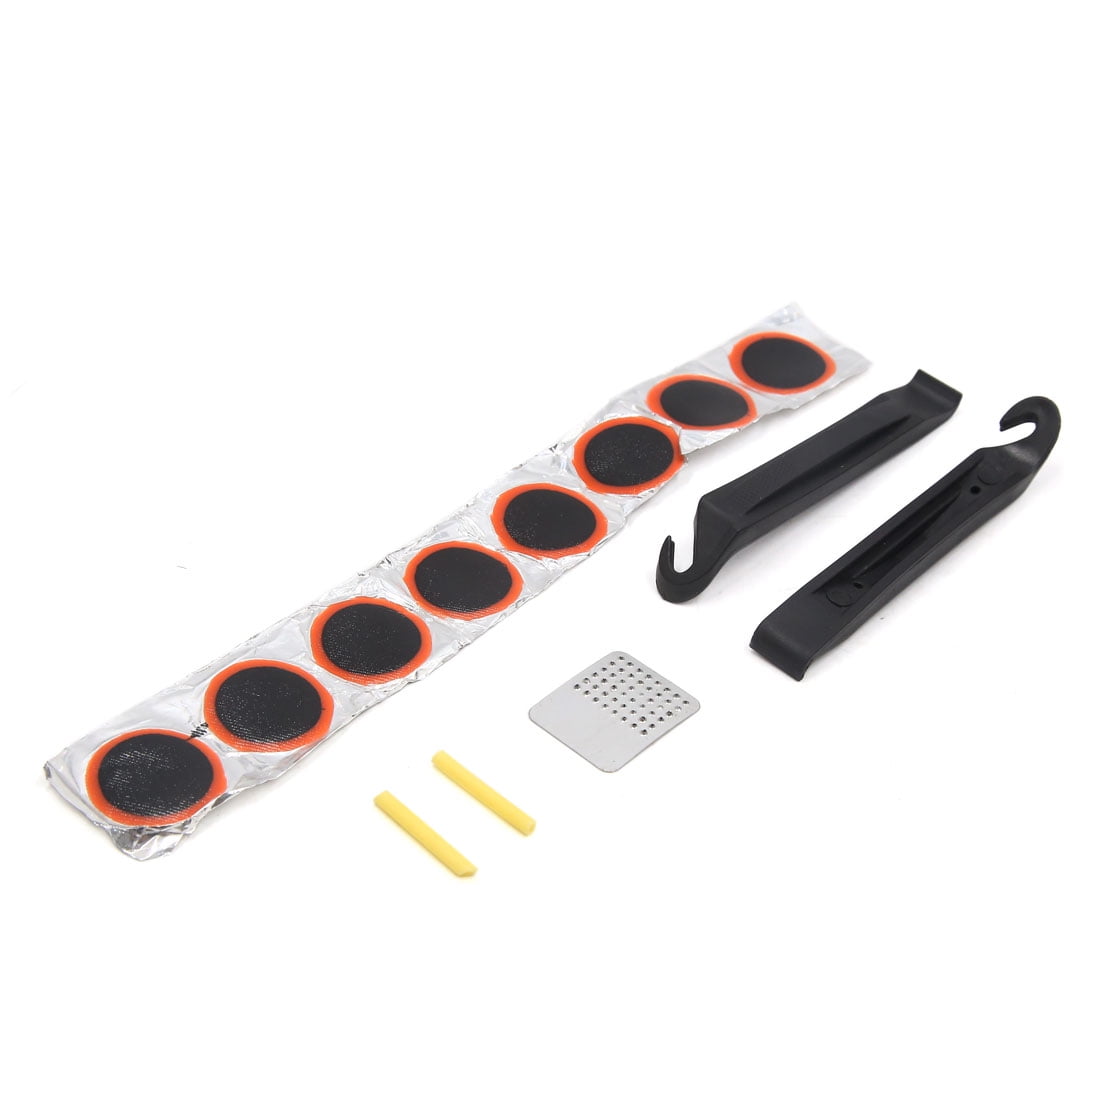 Portable Cycling Bike Bicycle Repair Rubber Glue Tire Patch Set Tyre Kit To T4Q4 